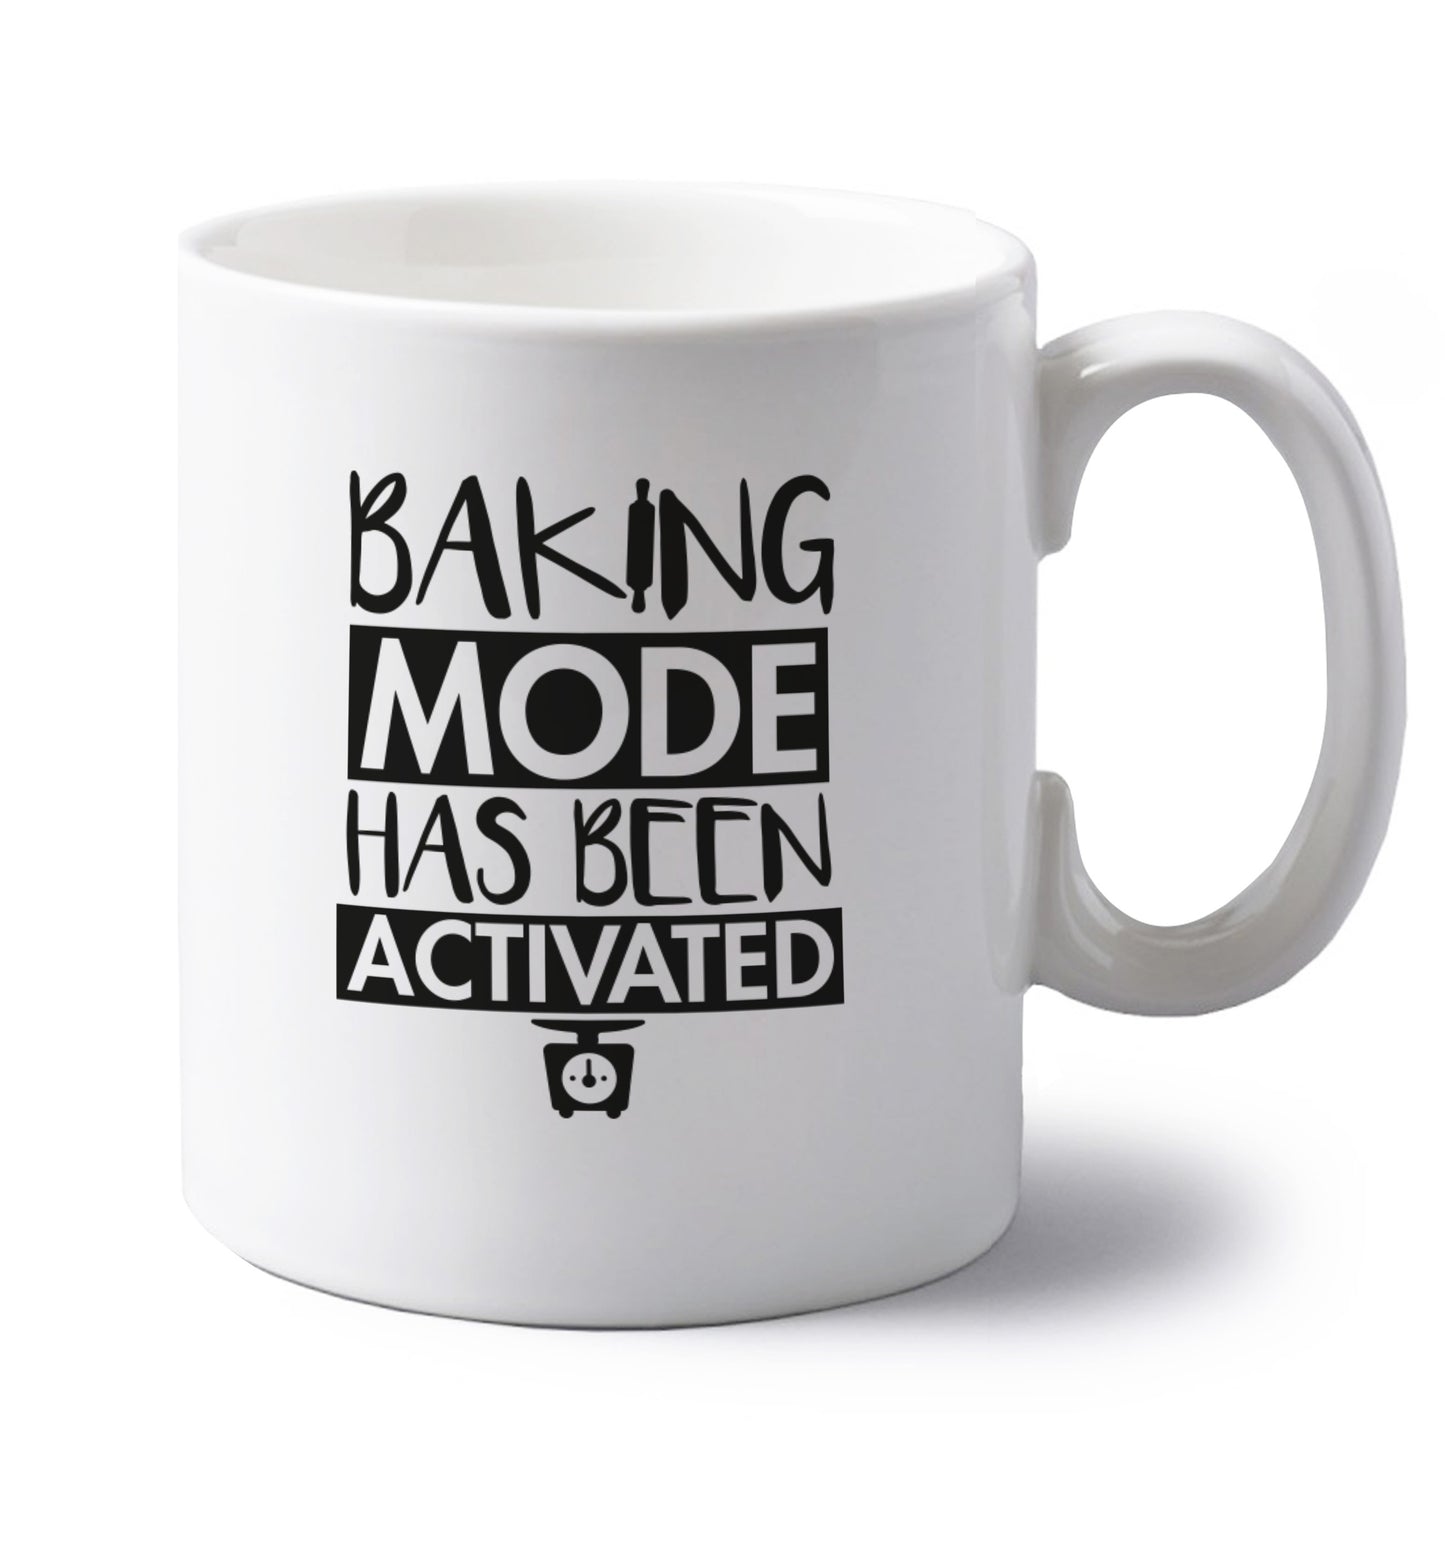 Baking mode has been activated left handed white ceramic mug 